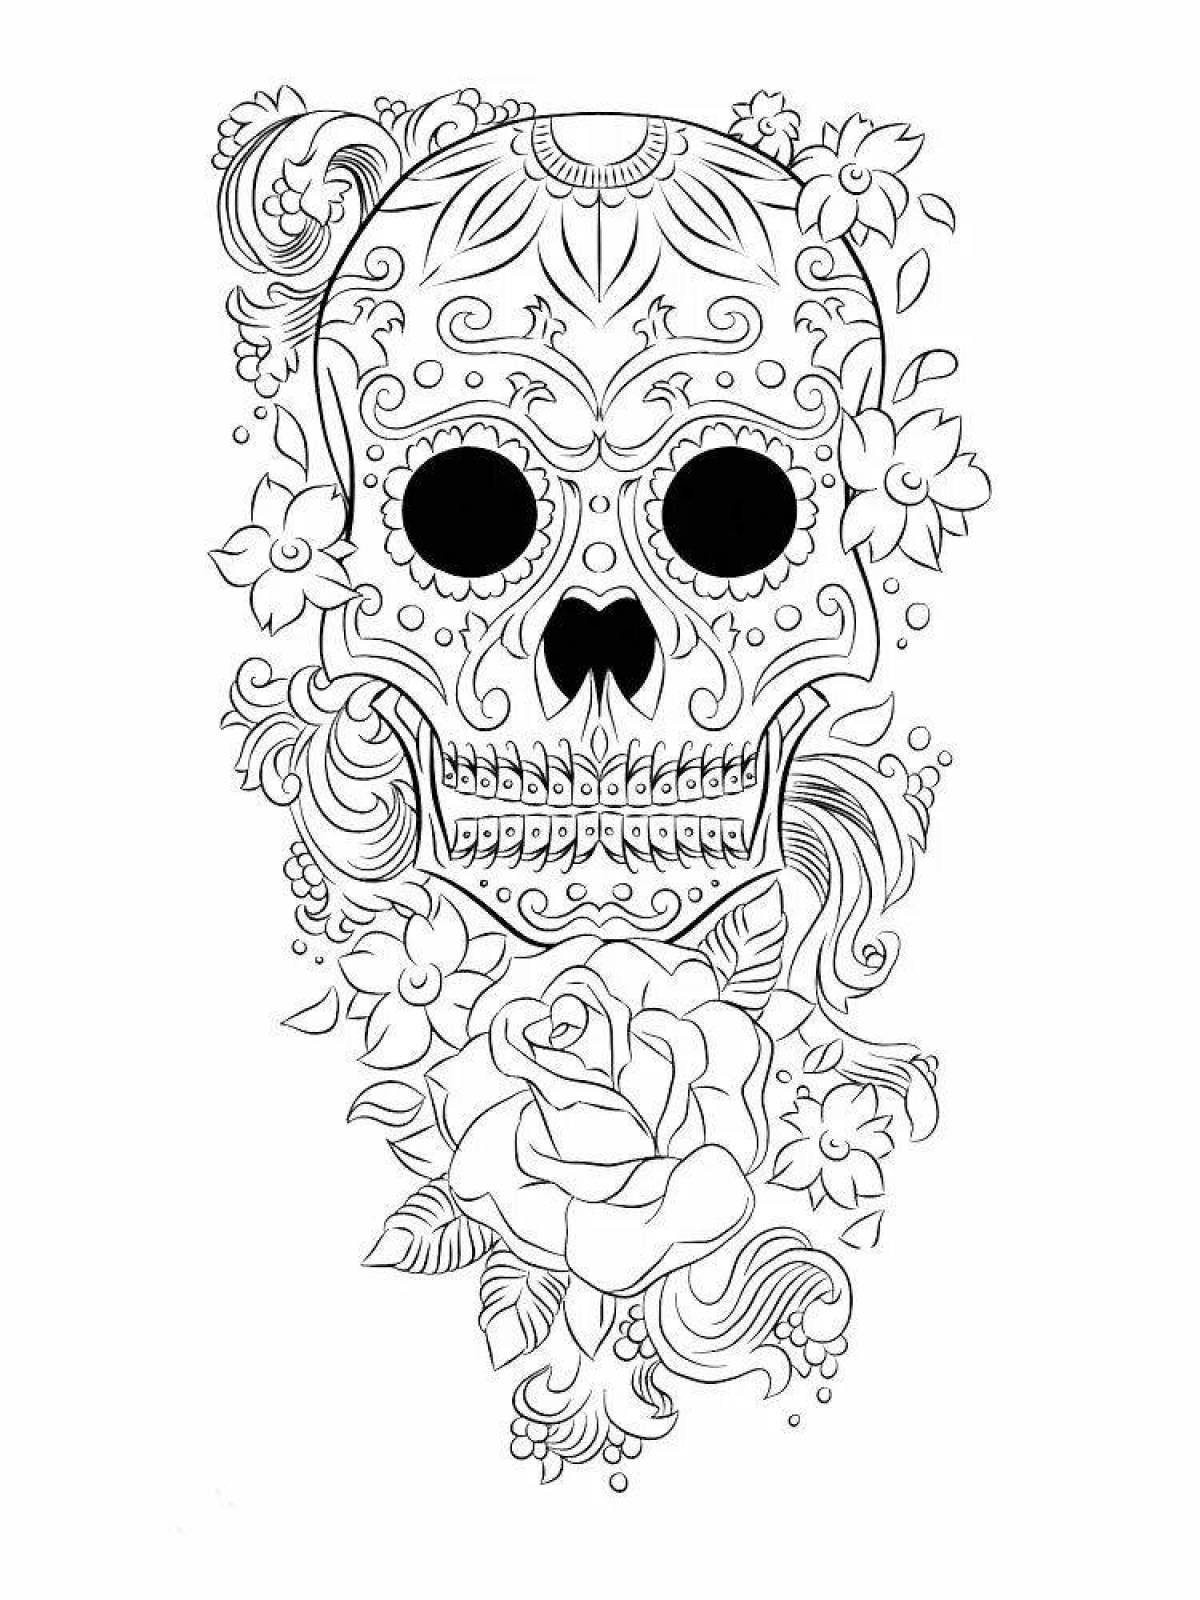 A fascinating anti-stress coloring of the skull